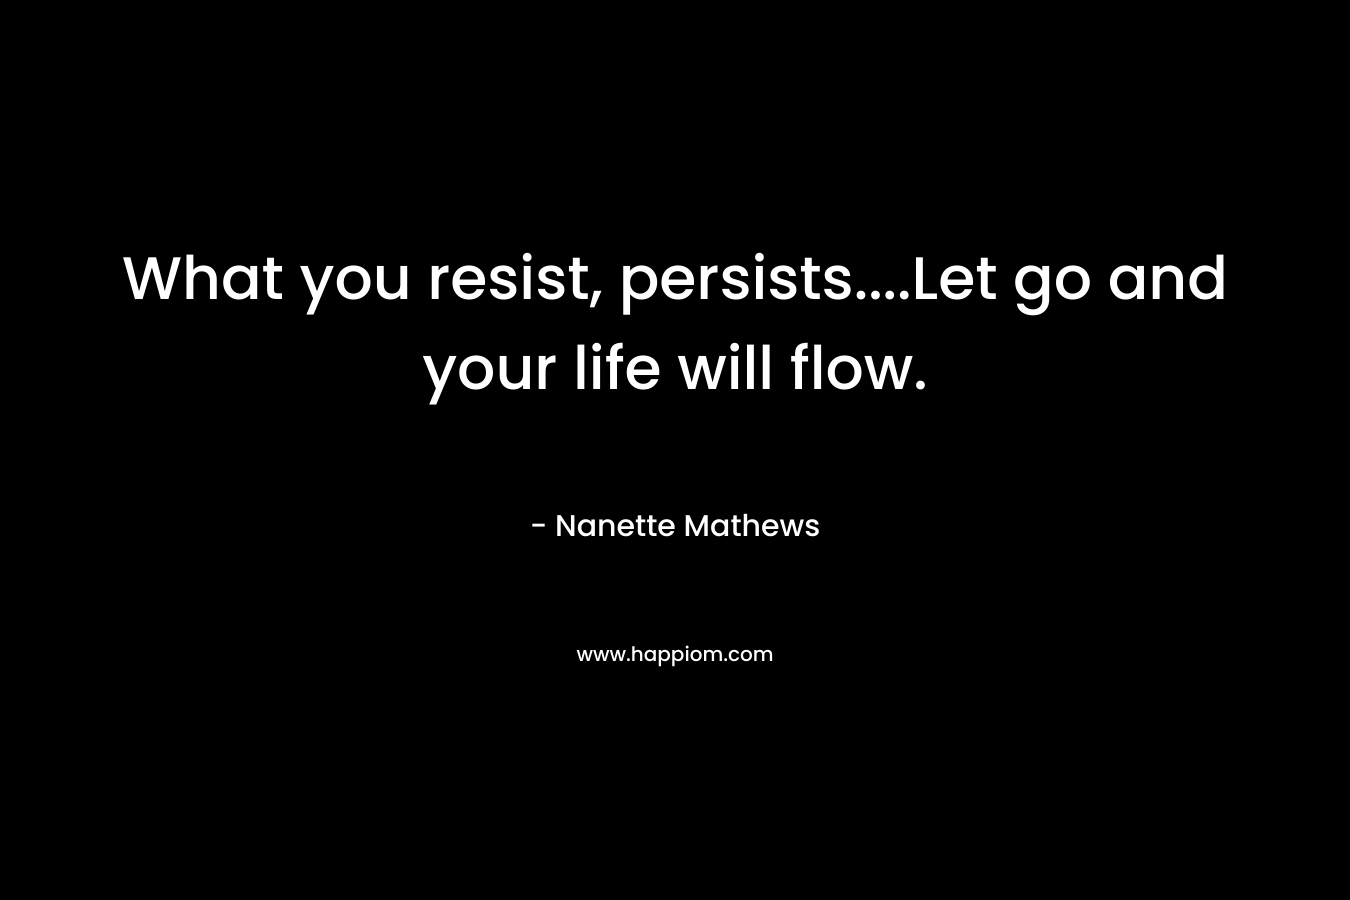 What you resist, persists....Let go and your life will flow.